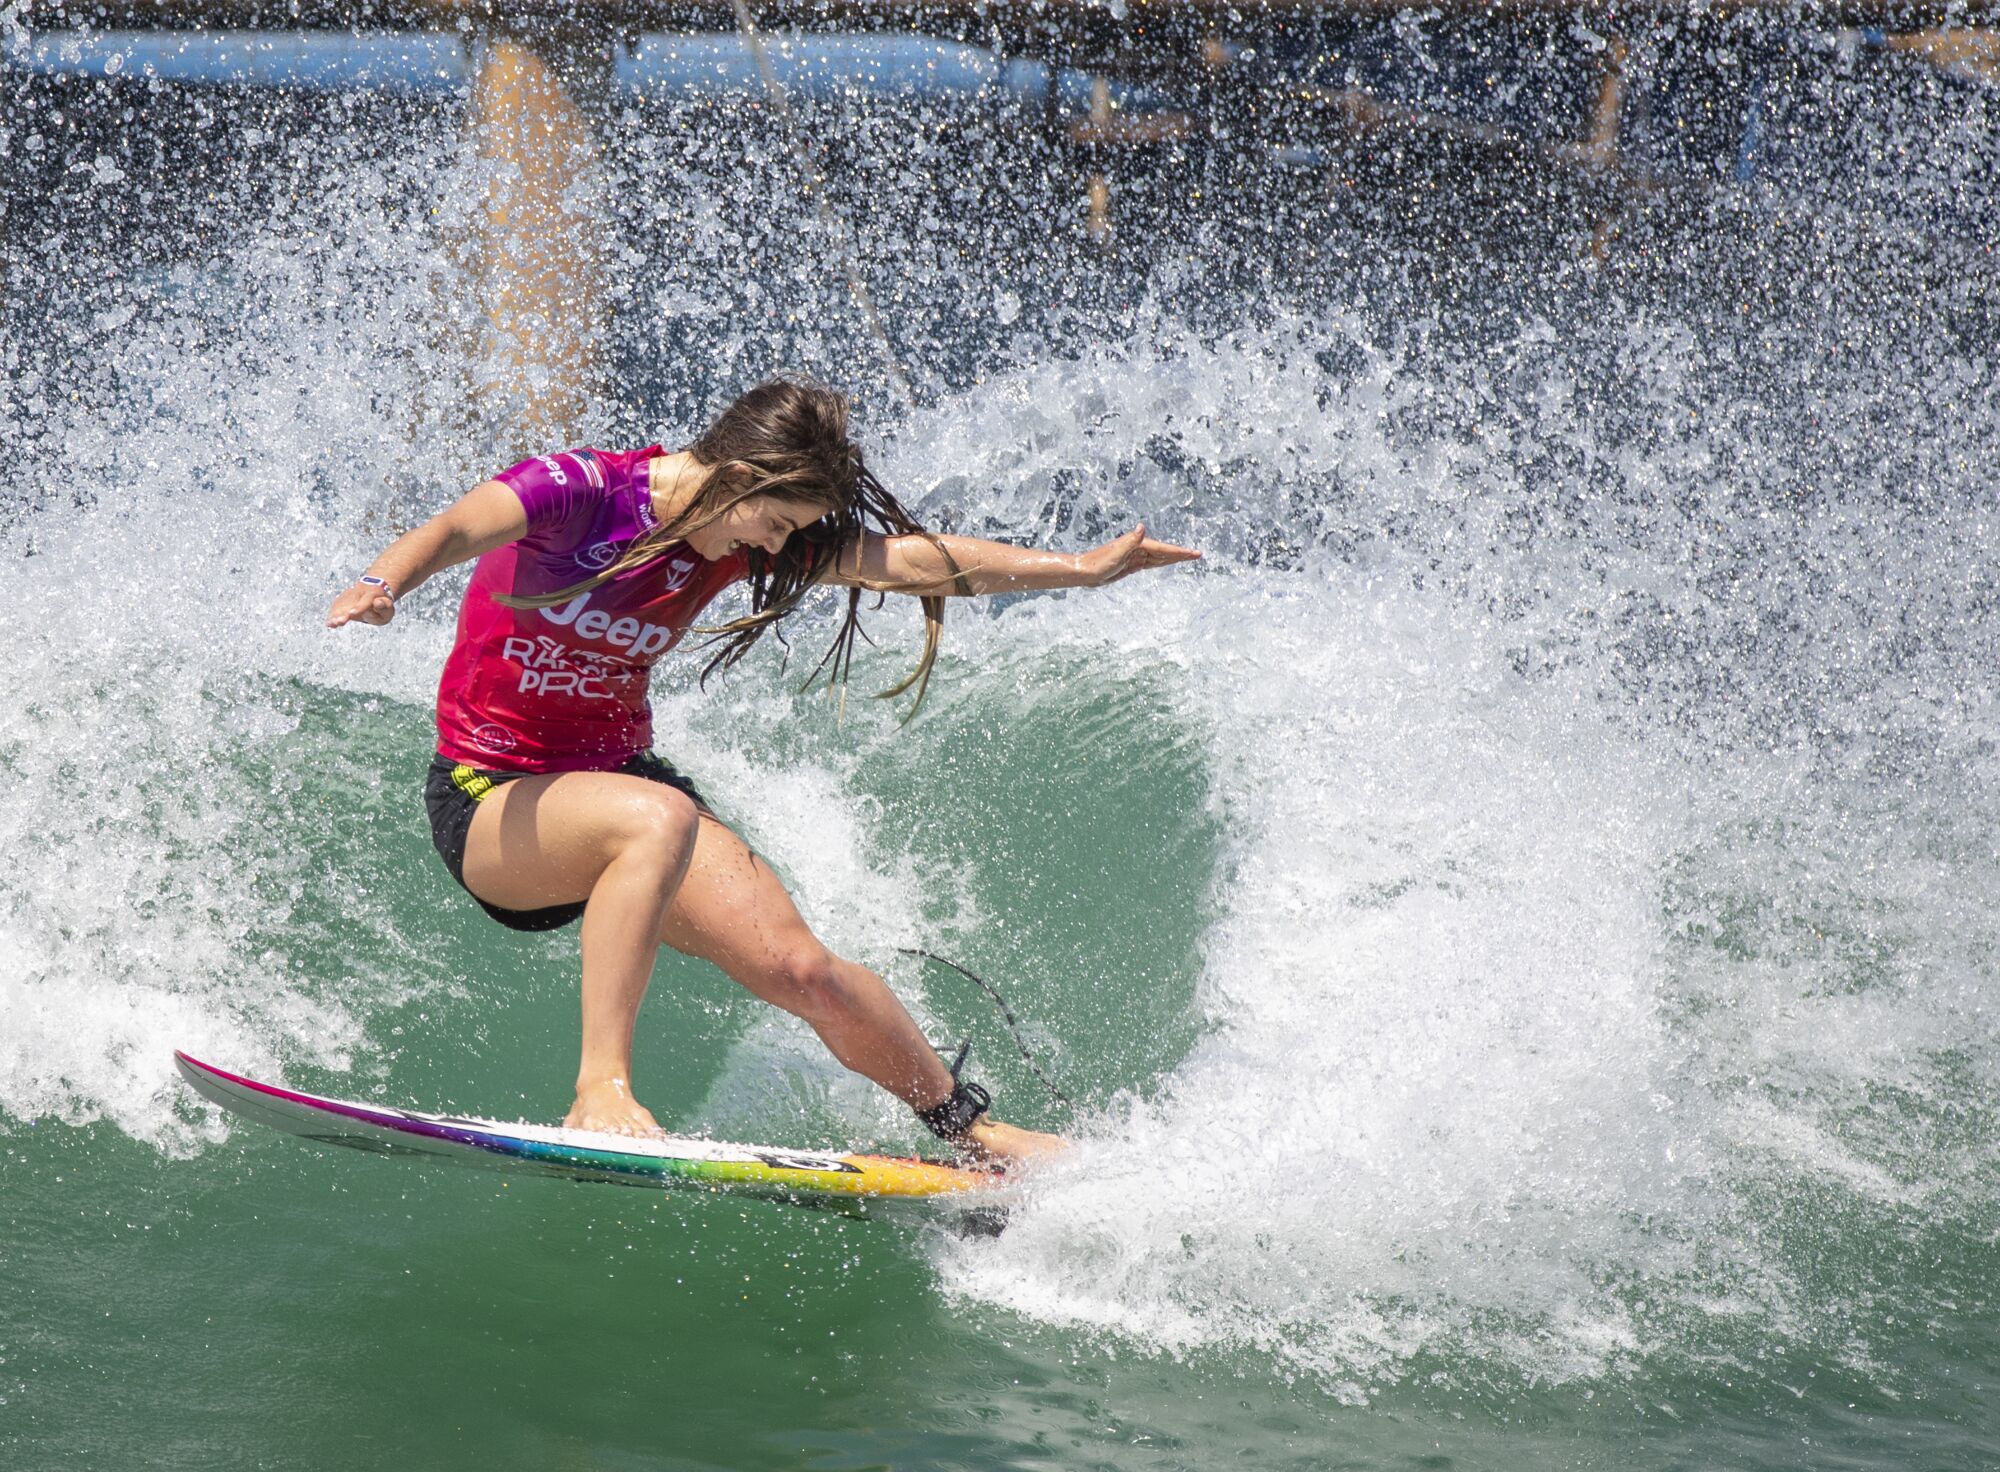 Caroline Marks, 19, of San Clemente, does a slashing turn while competing. 